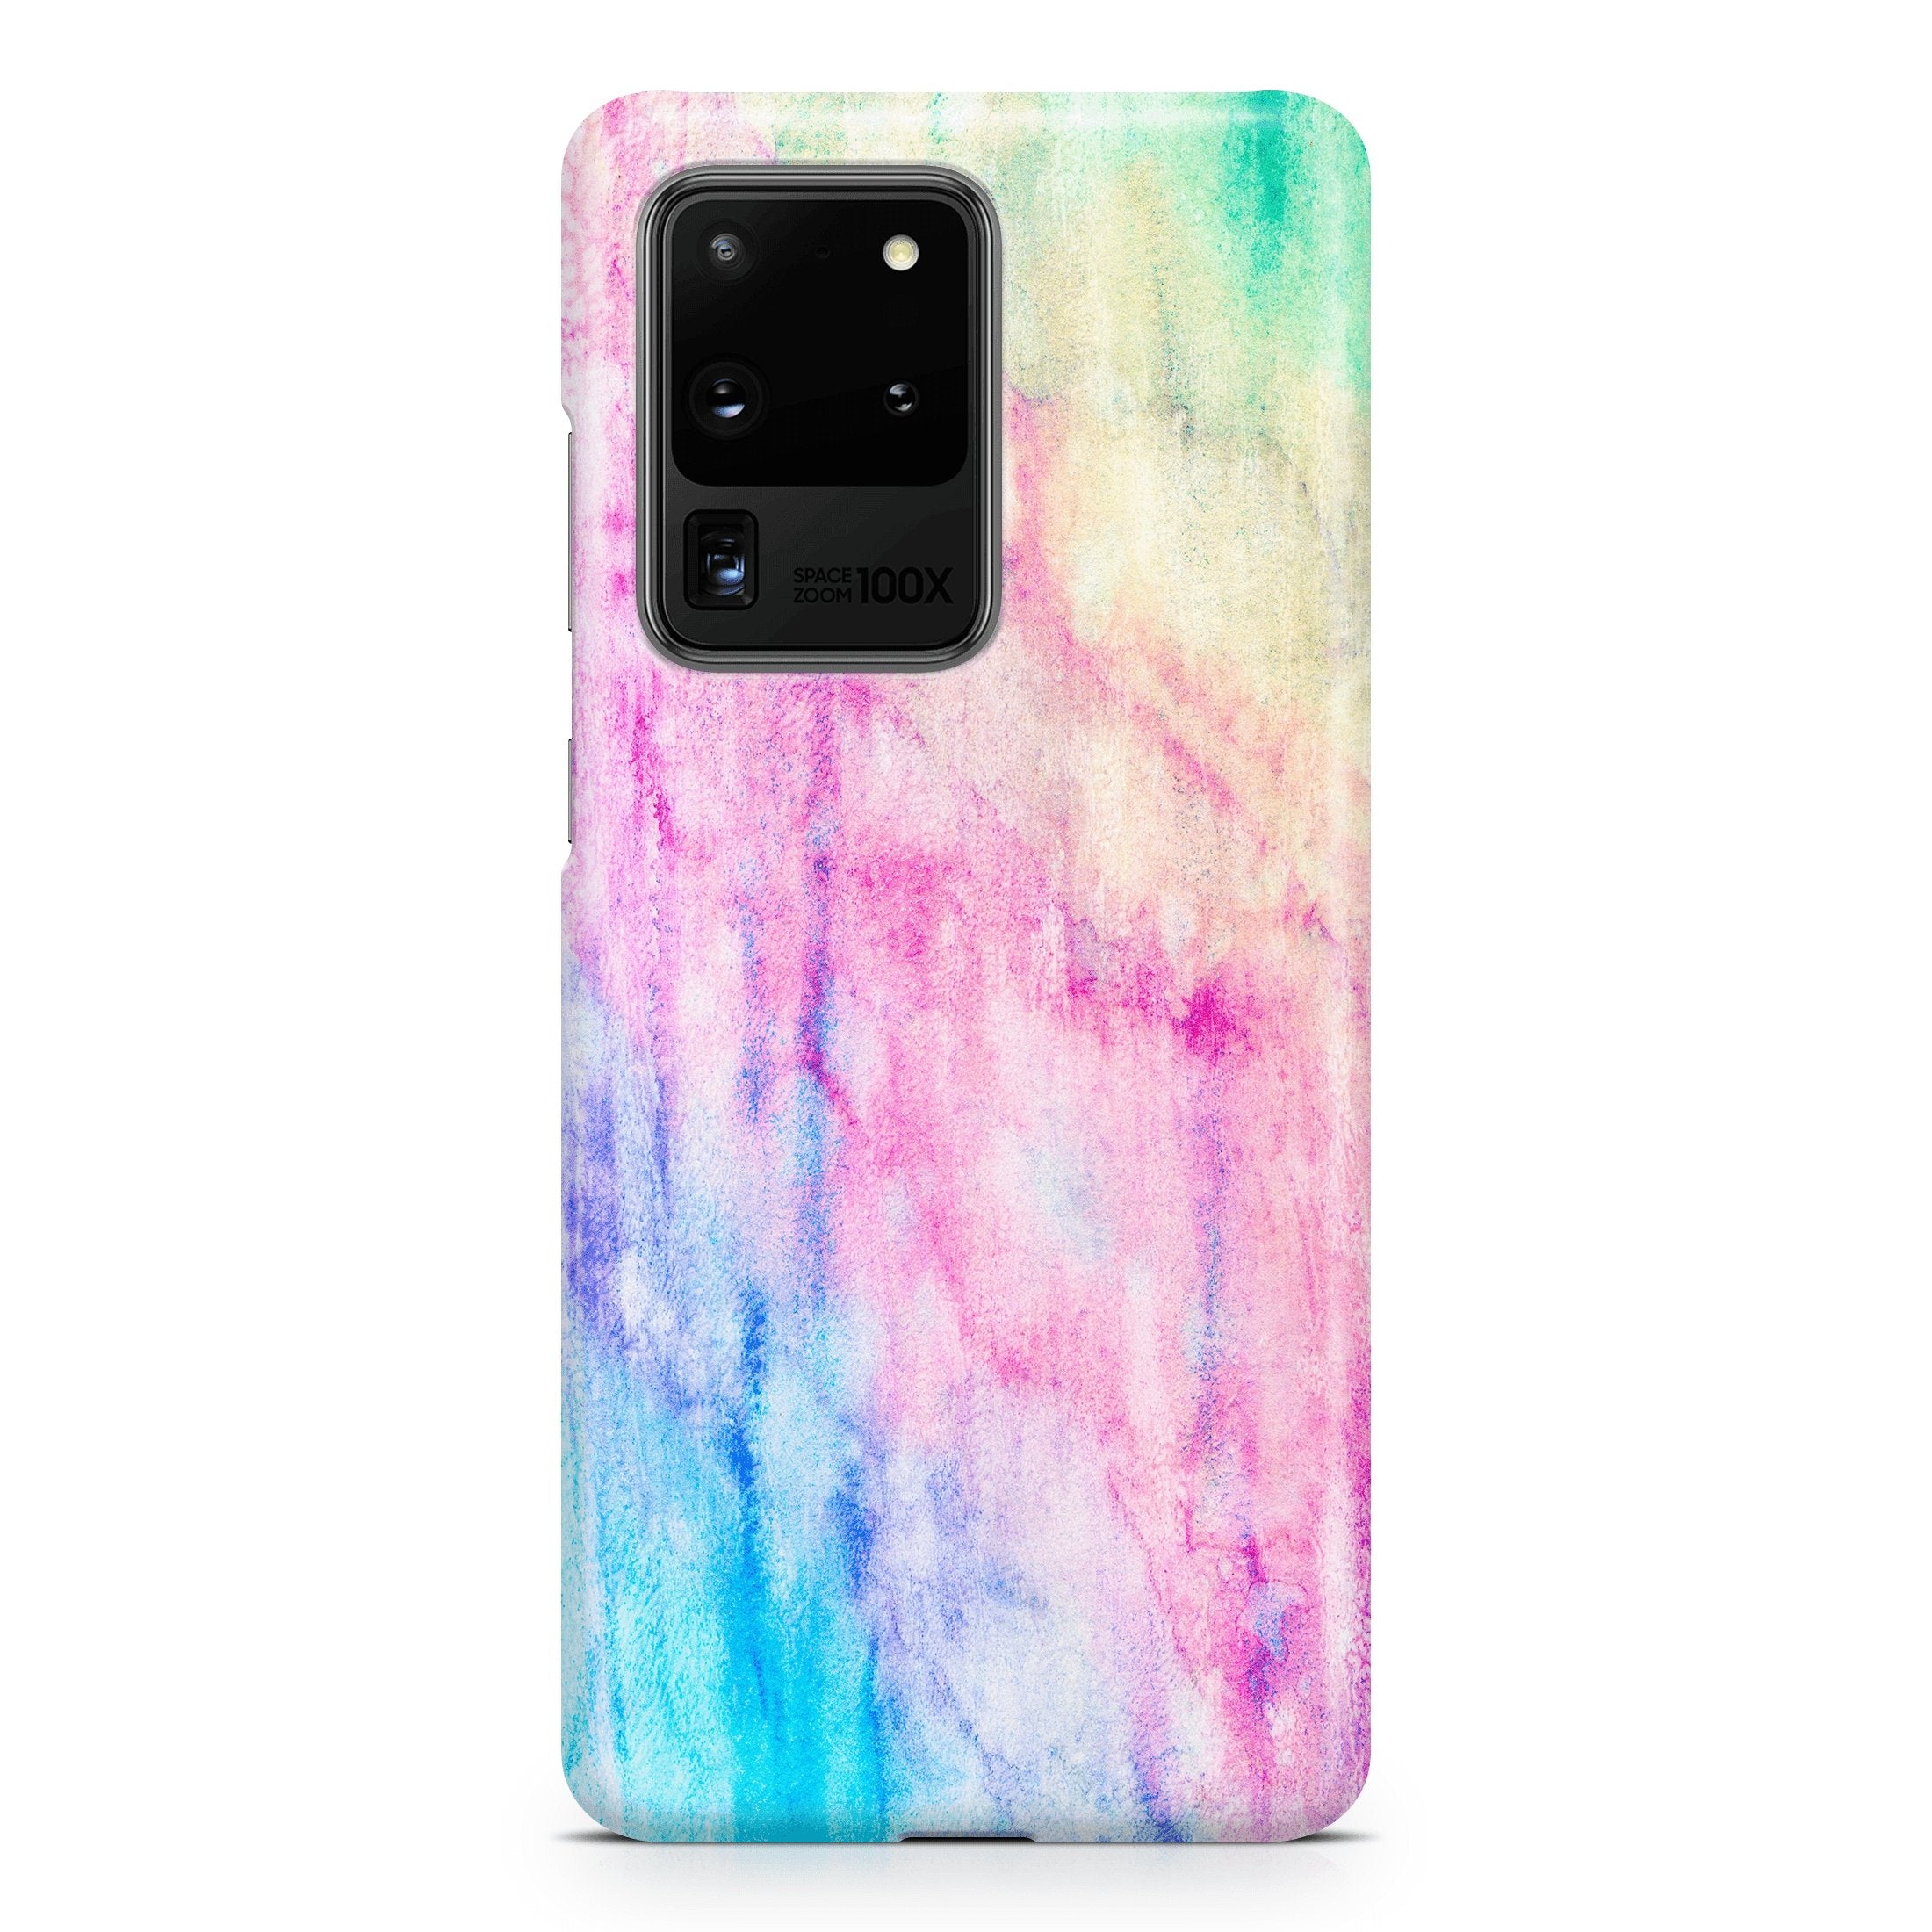 Fading Rainbow - Samsung phone case designs by CaseSwagger